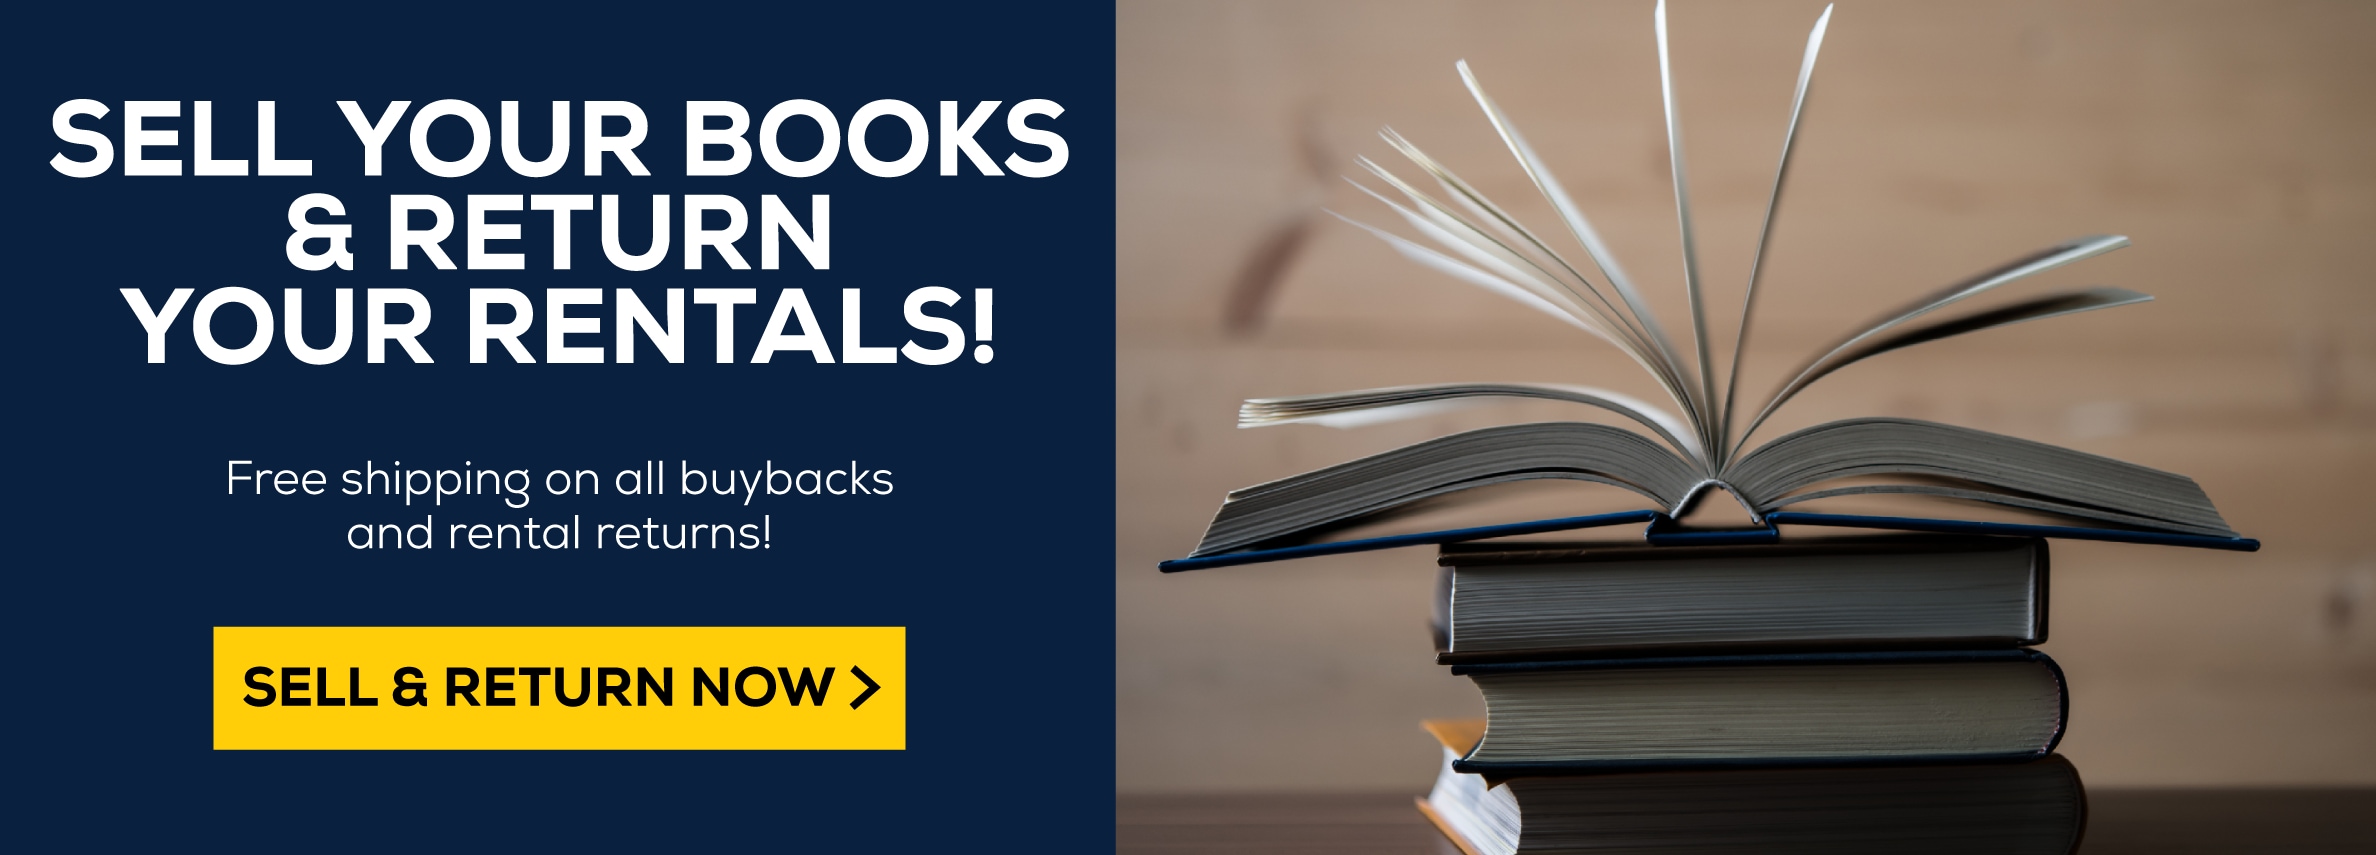 Sell your textbooks and return your rentals! Free shipping on all buybacks and rental returns! Sell and return now!